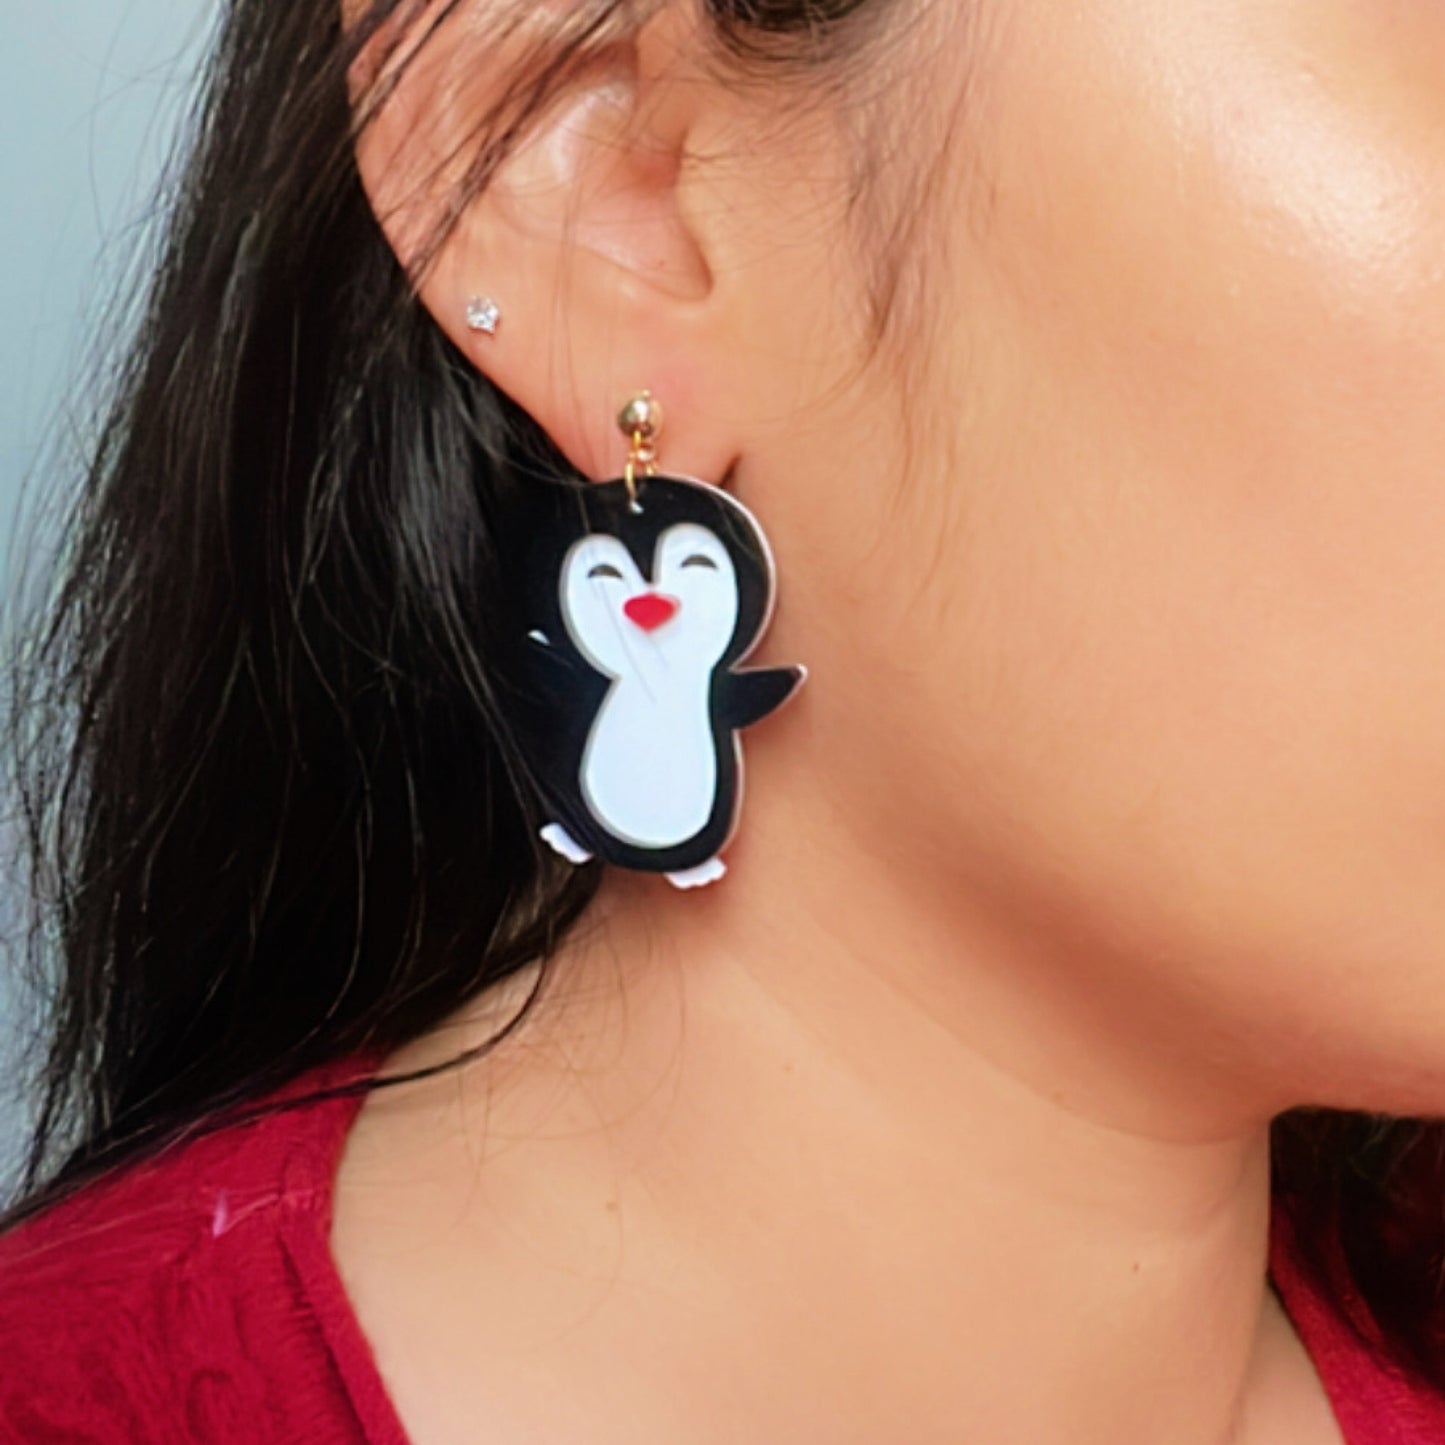 Punny Penguin Earrings - White, Black and Red - Nian by Nidhi - worn by a woman